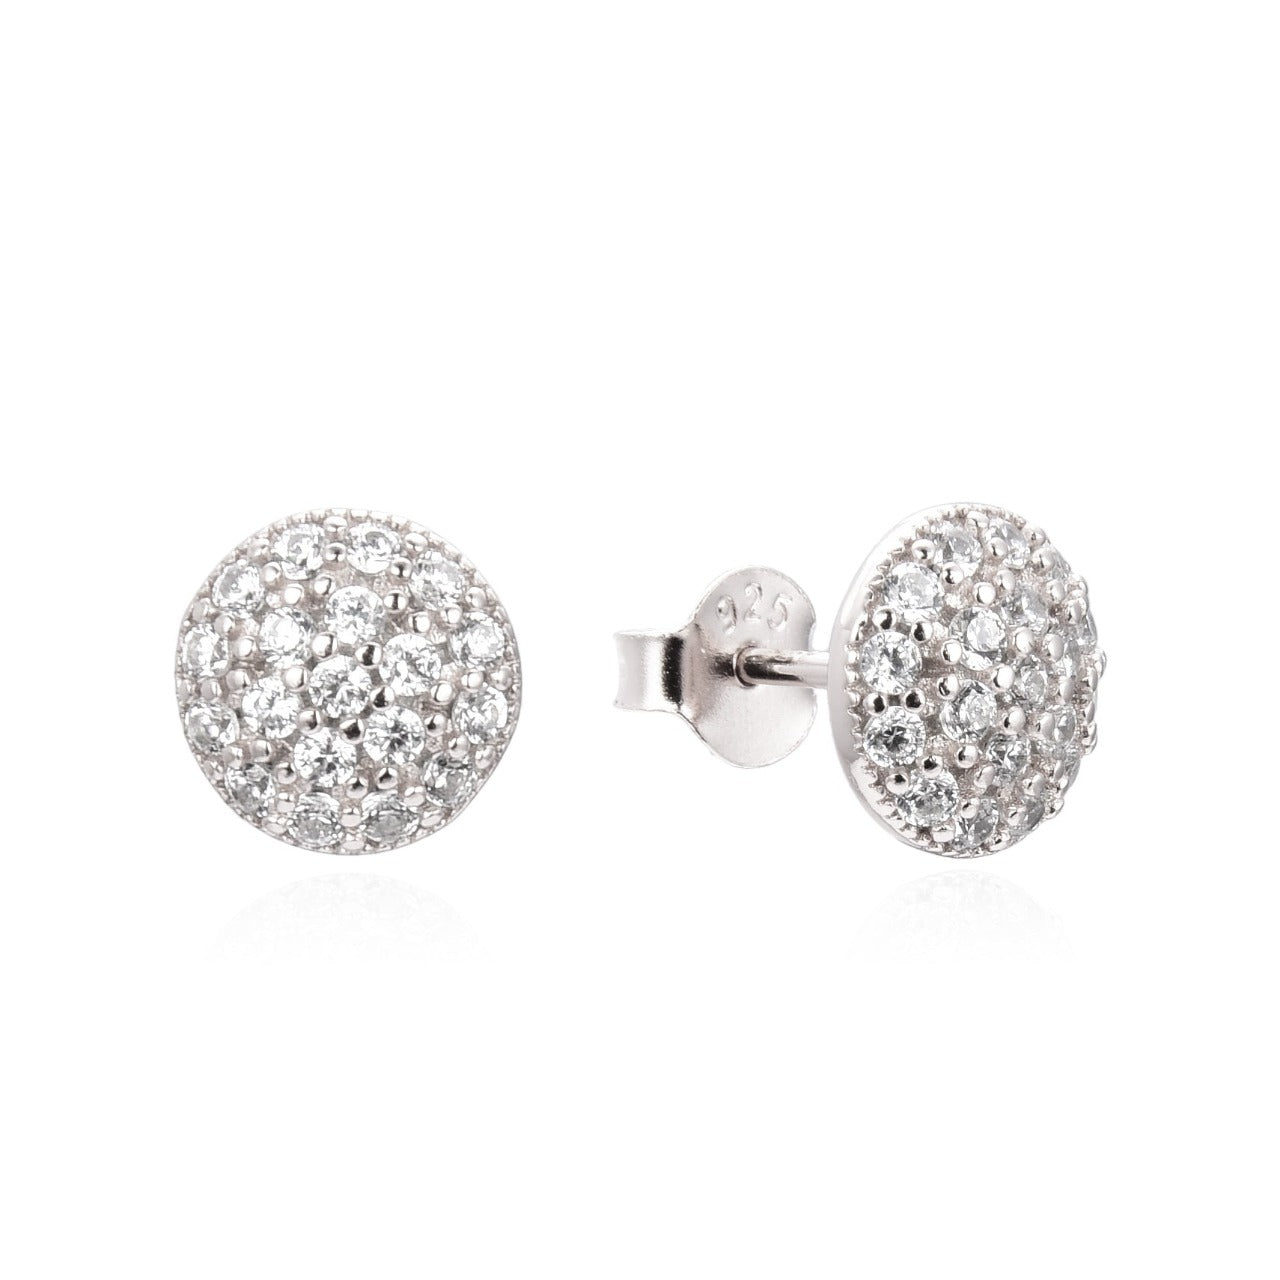 Kilkenny Silver Silver Diamante Stud Earrings  Sterling silver stud earrings with cubic zirconia stones. Highlight your beauty with some extra sparkle.